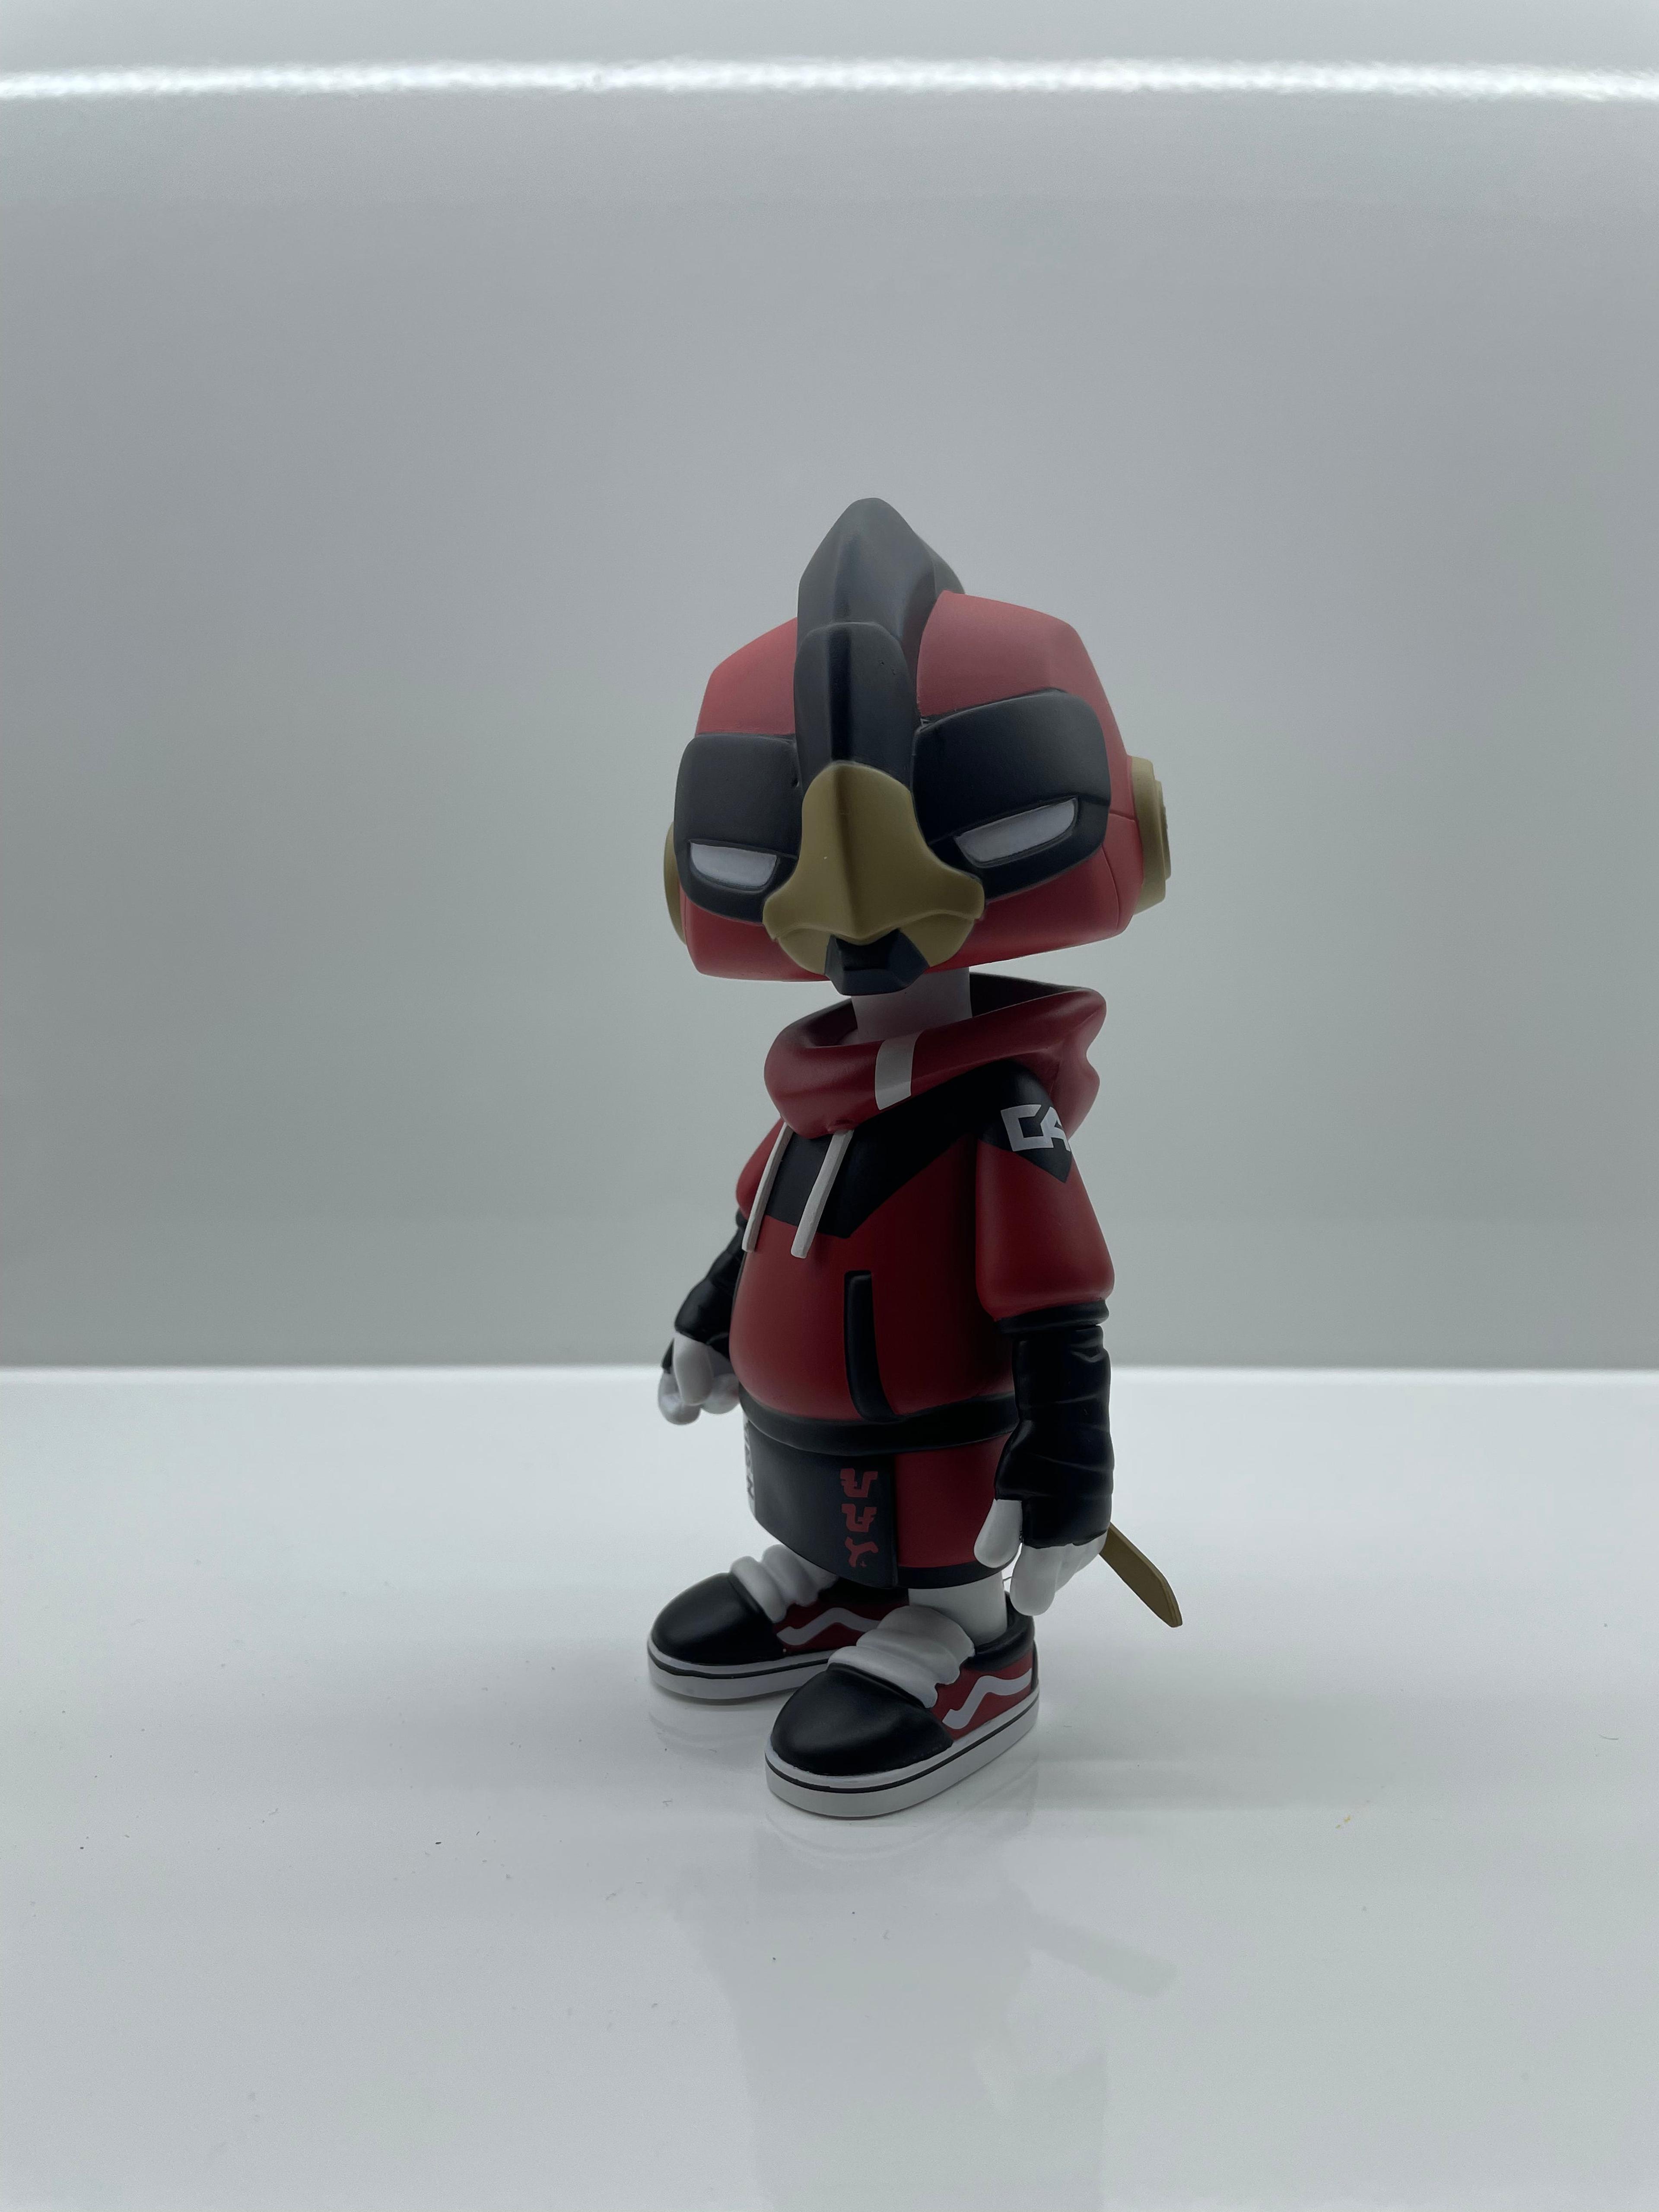 Alternate View 12 of C4: Red Talon by ChknHead Creon x Martian Toys